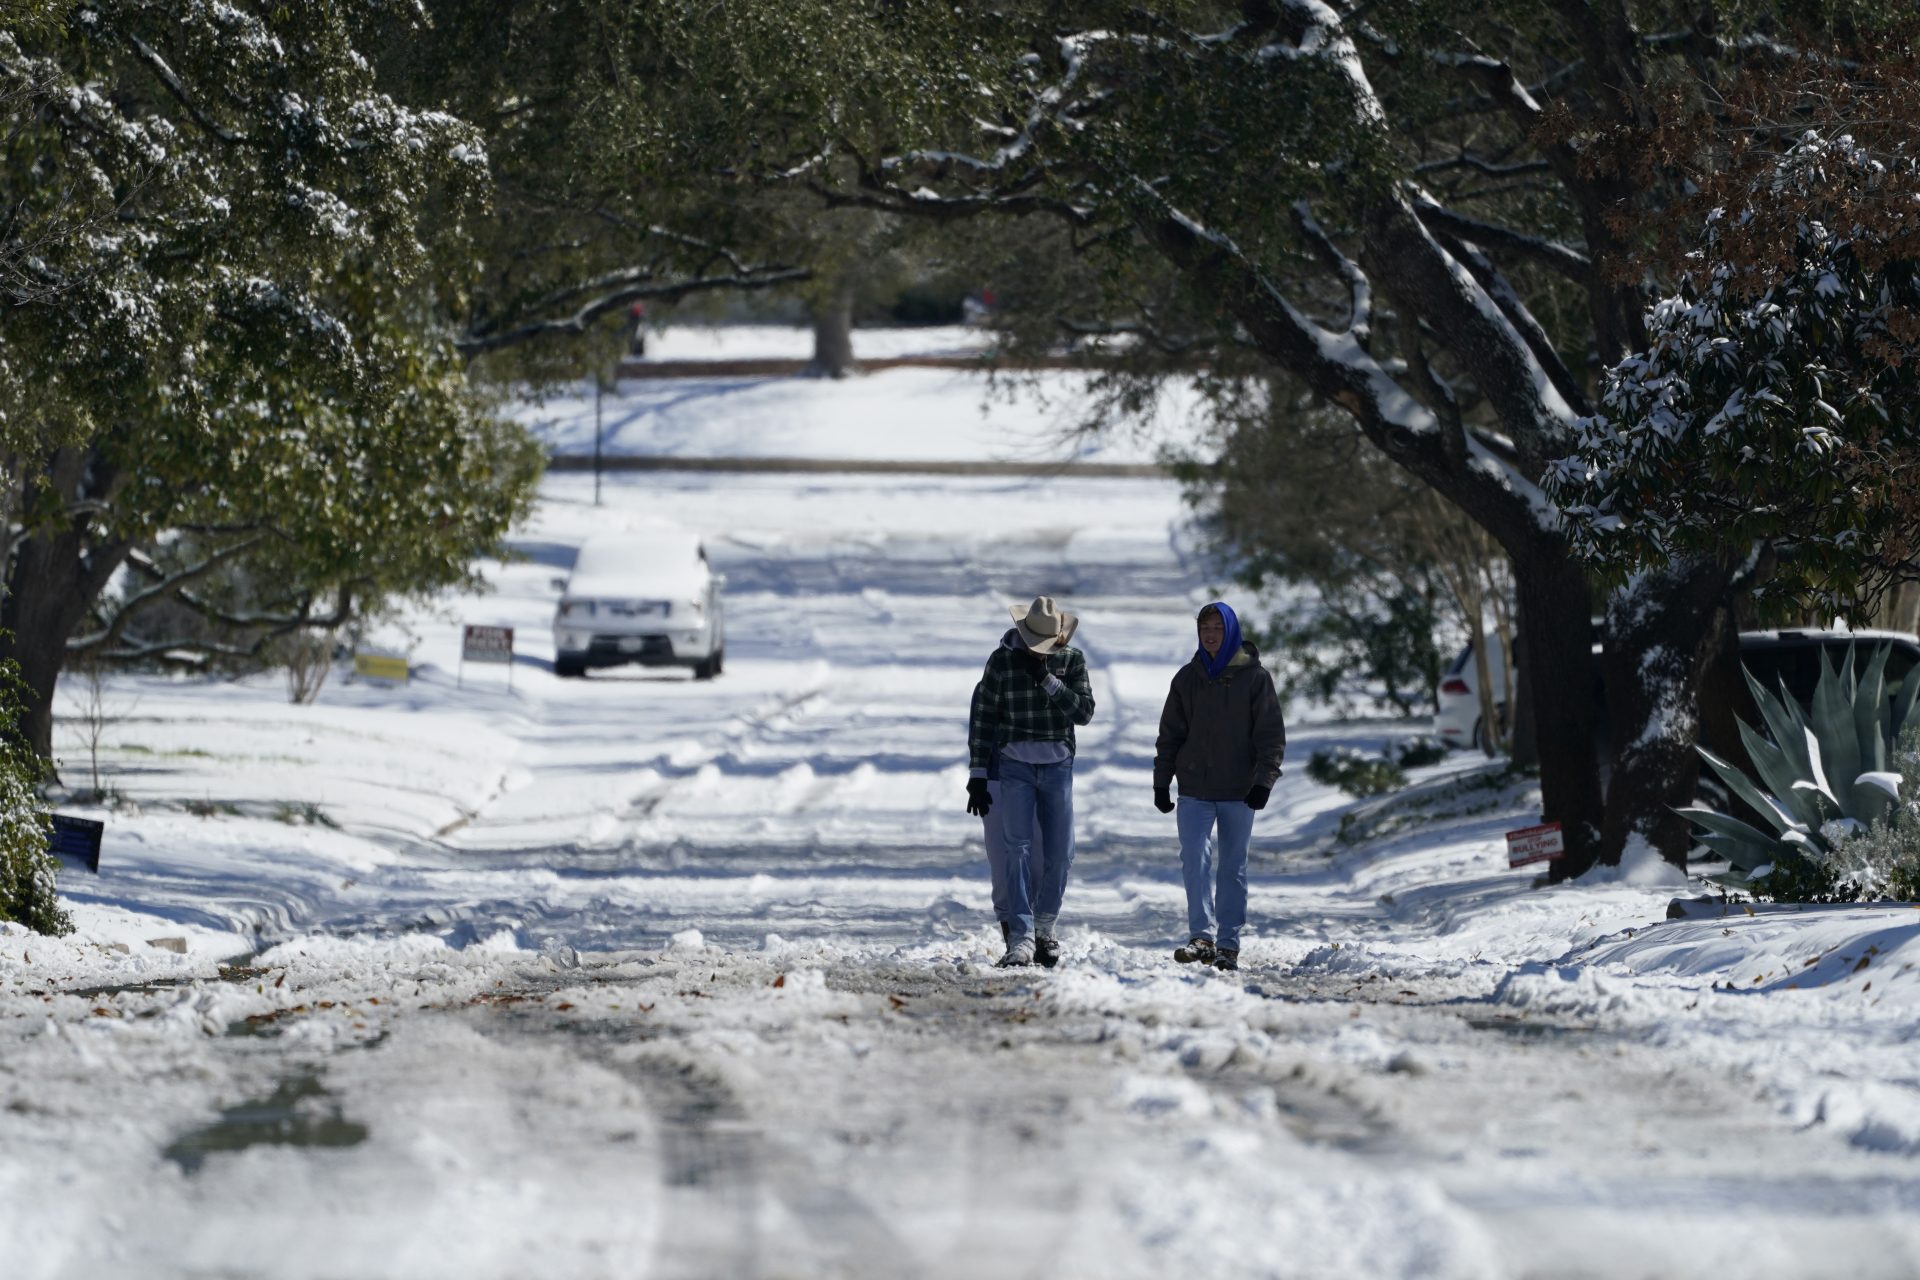 Residents walk through snow, Monday, Feb. 15, 2021, in San Antonio. San Antonio received 3-5 inches of snow over night. A winter storm dropping snow and ice also sent temperatures plunging across the southern Plains, prompting a power emergency in Texas a day after conditions canceled flights and impacted traffic across large swaths of the U.S.